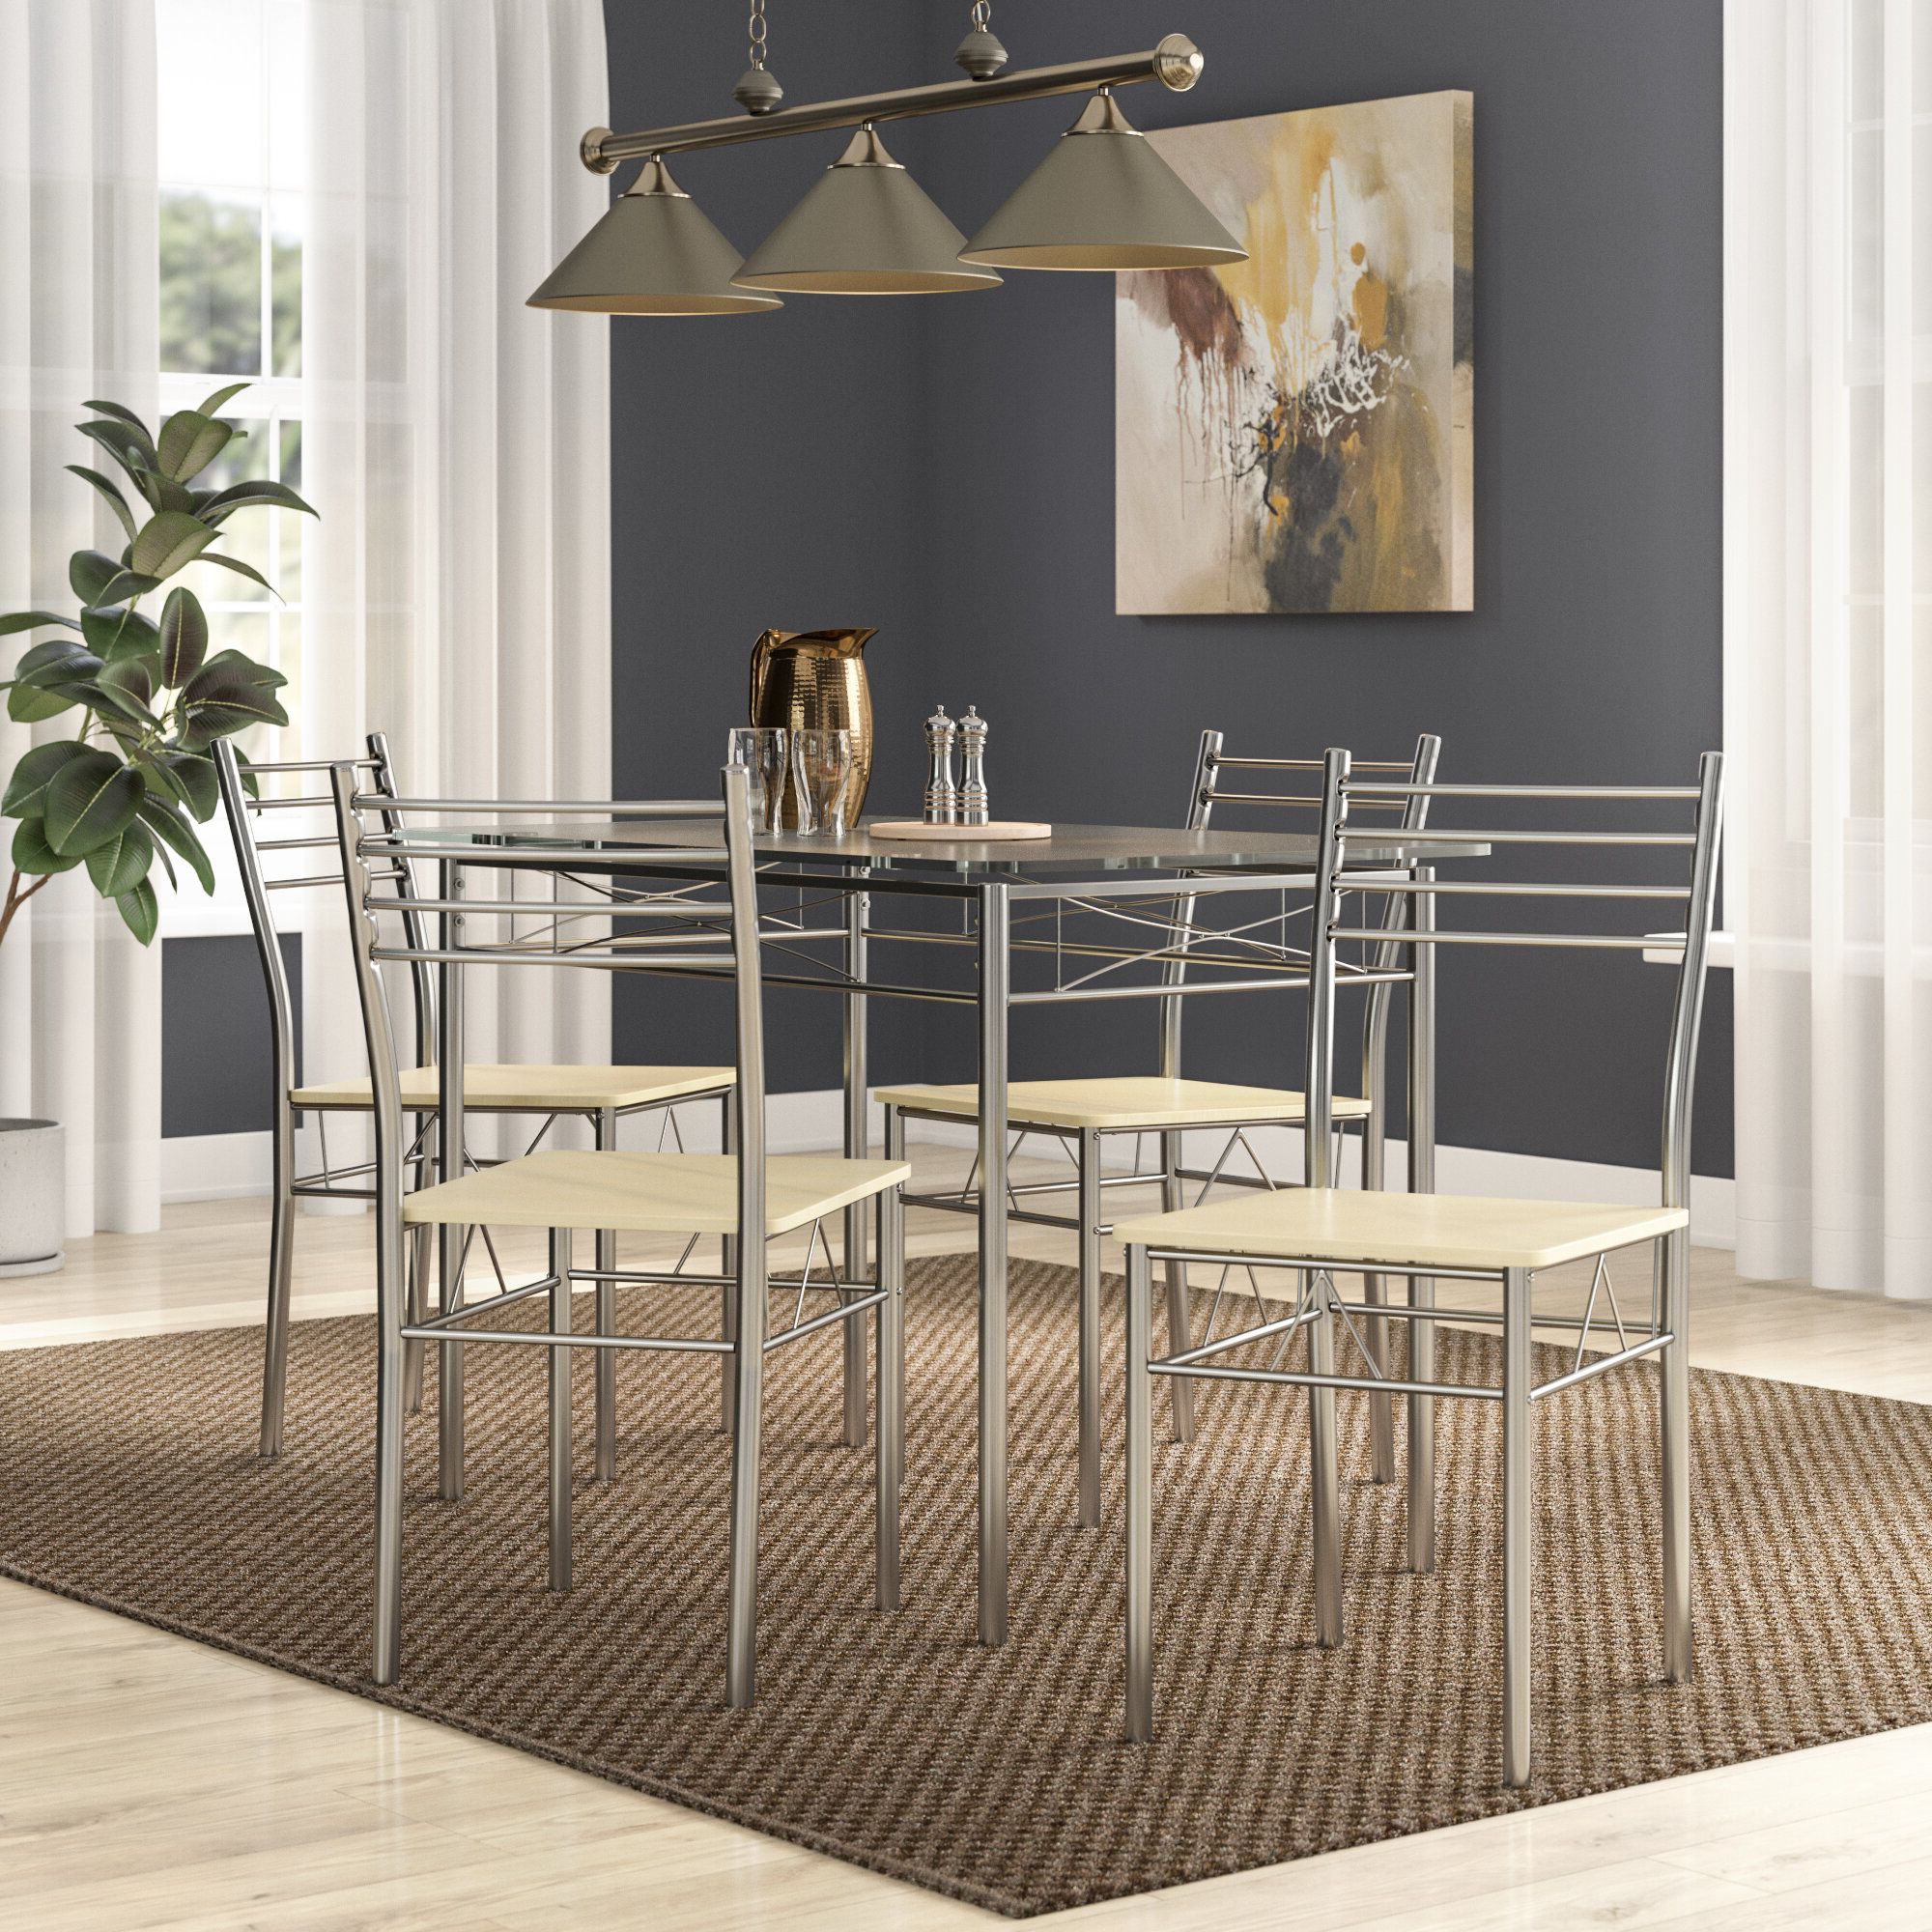 Most Recent North Reading 5 Piece Dining Table Sets In North Reading 5 Piece Dining Table Set (Photo 3 of 20)